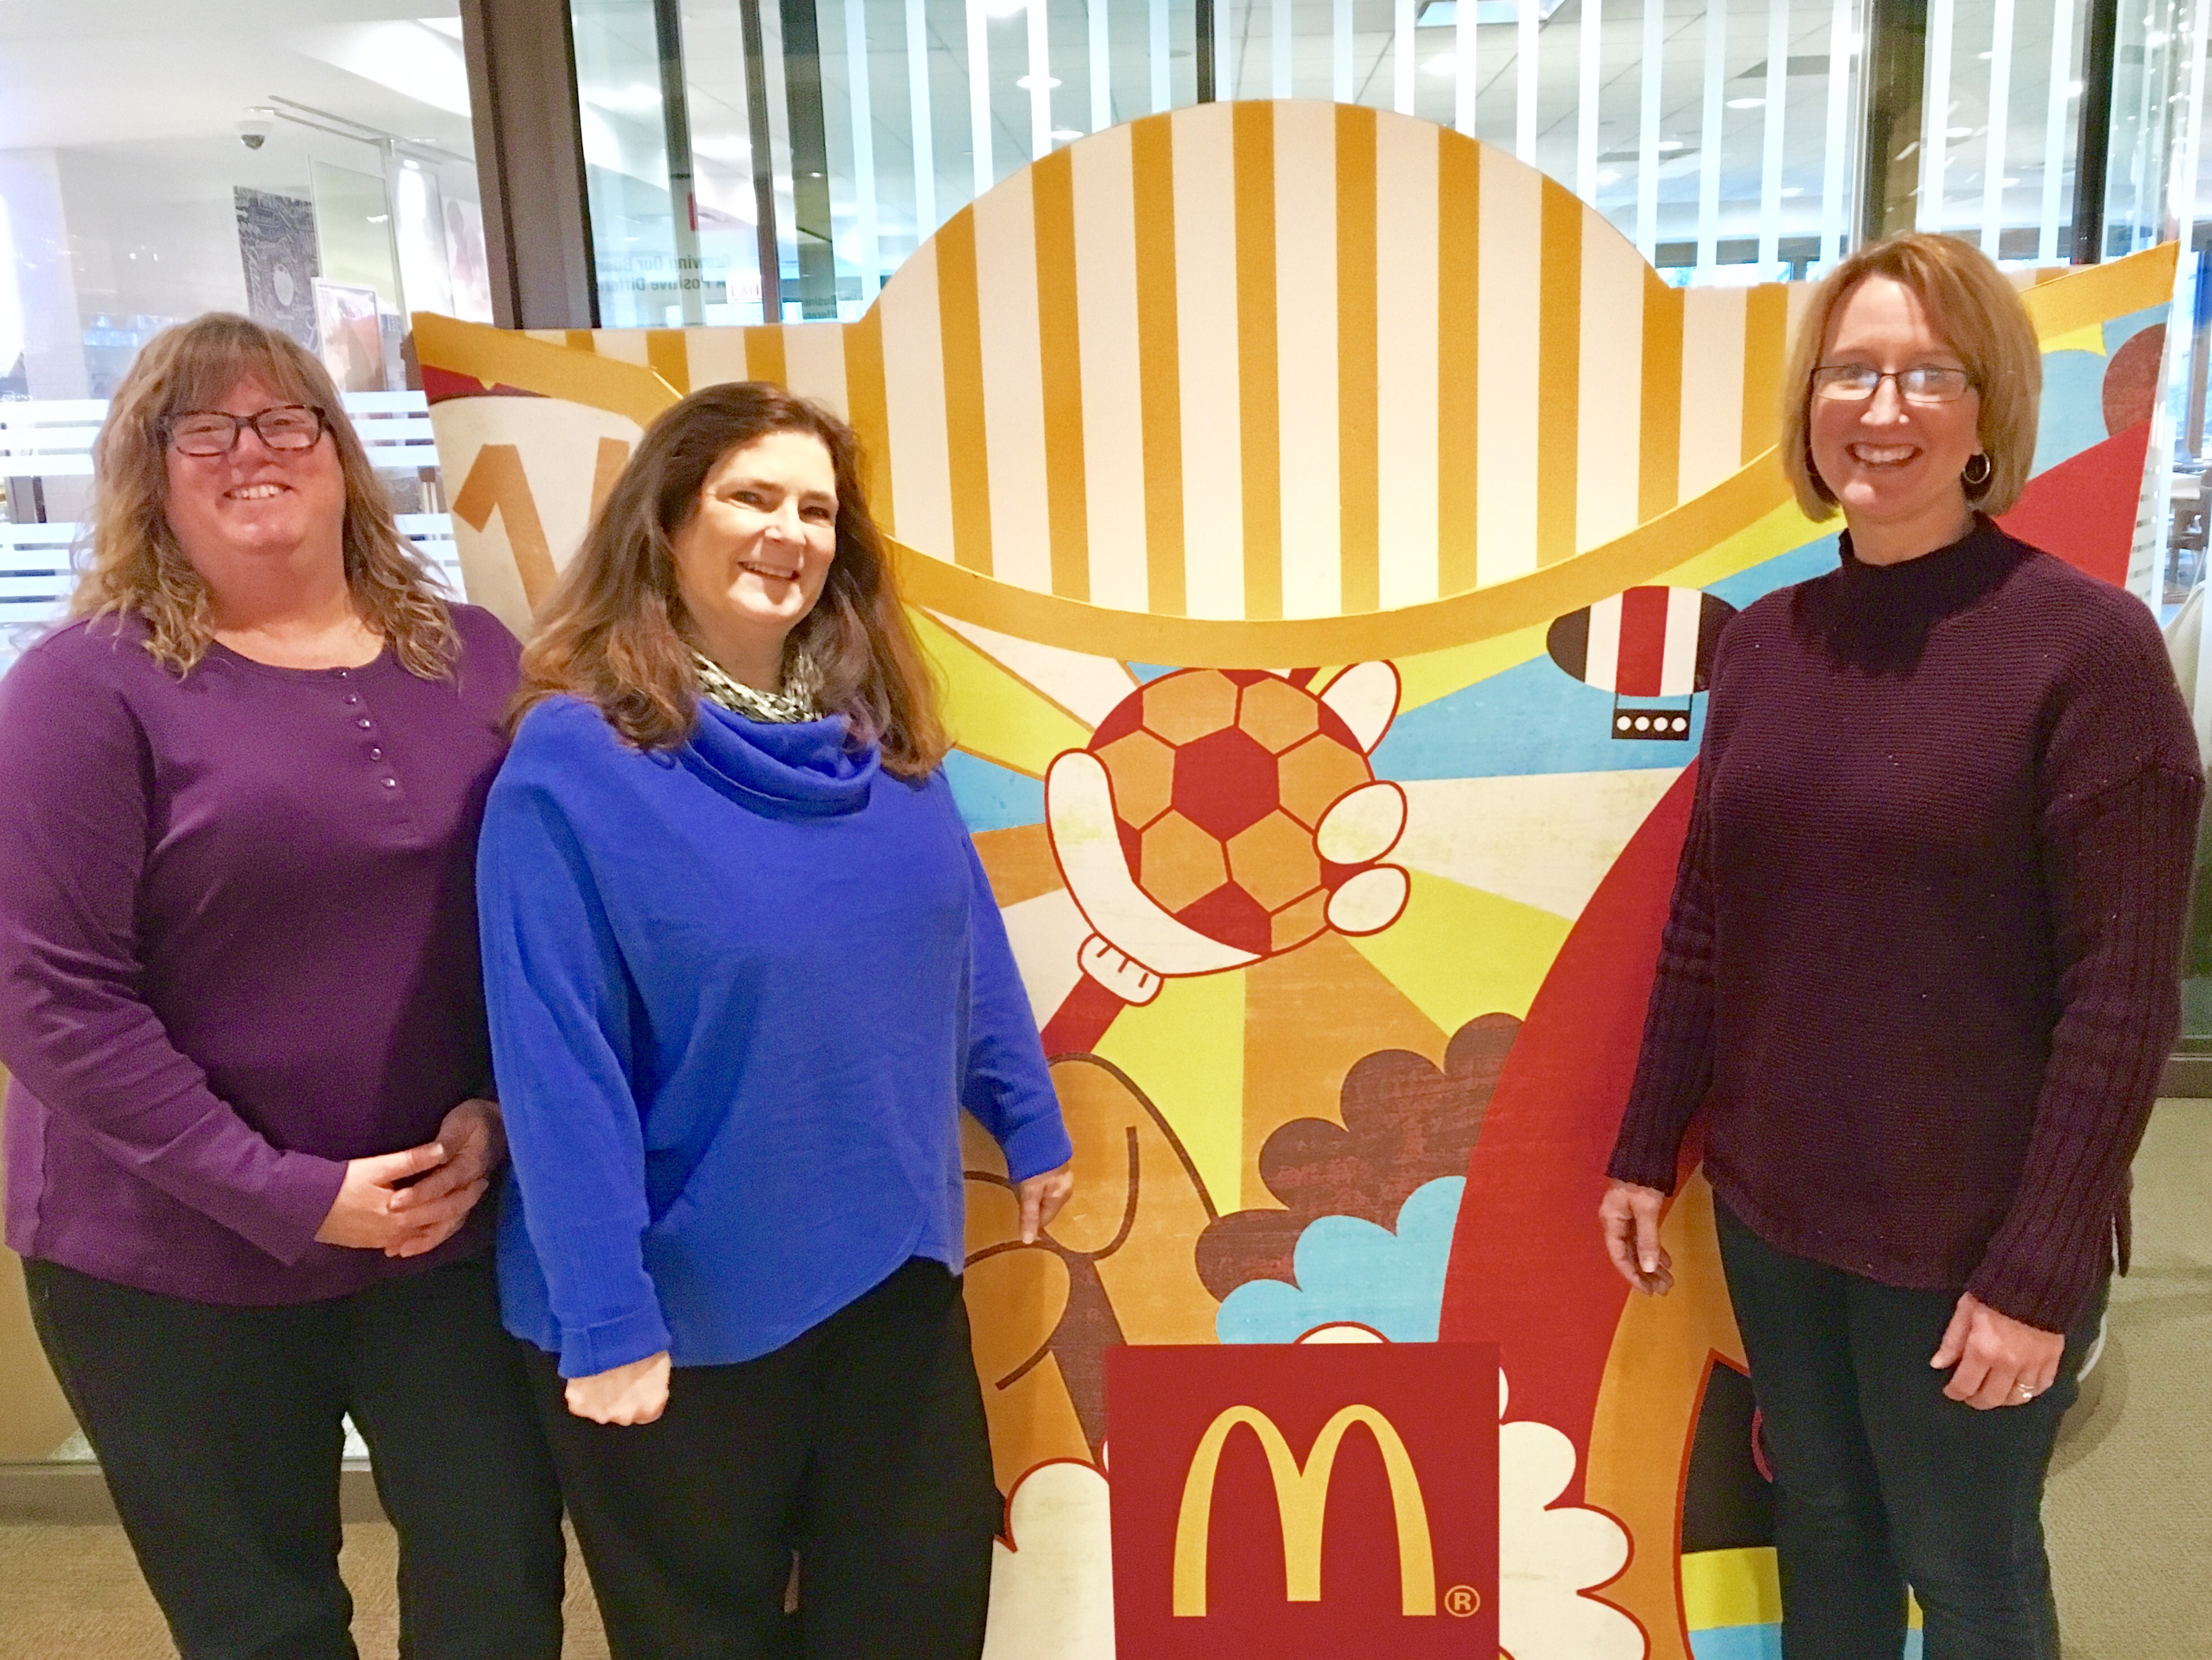 Commercial Litigation Practice Group, McDonald’s Corporation. Pictured left to right: Sharyl Tamssot, Sue Stopka, Diane Diaz